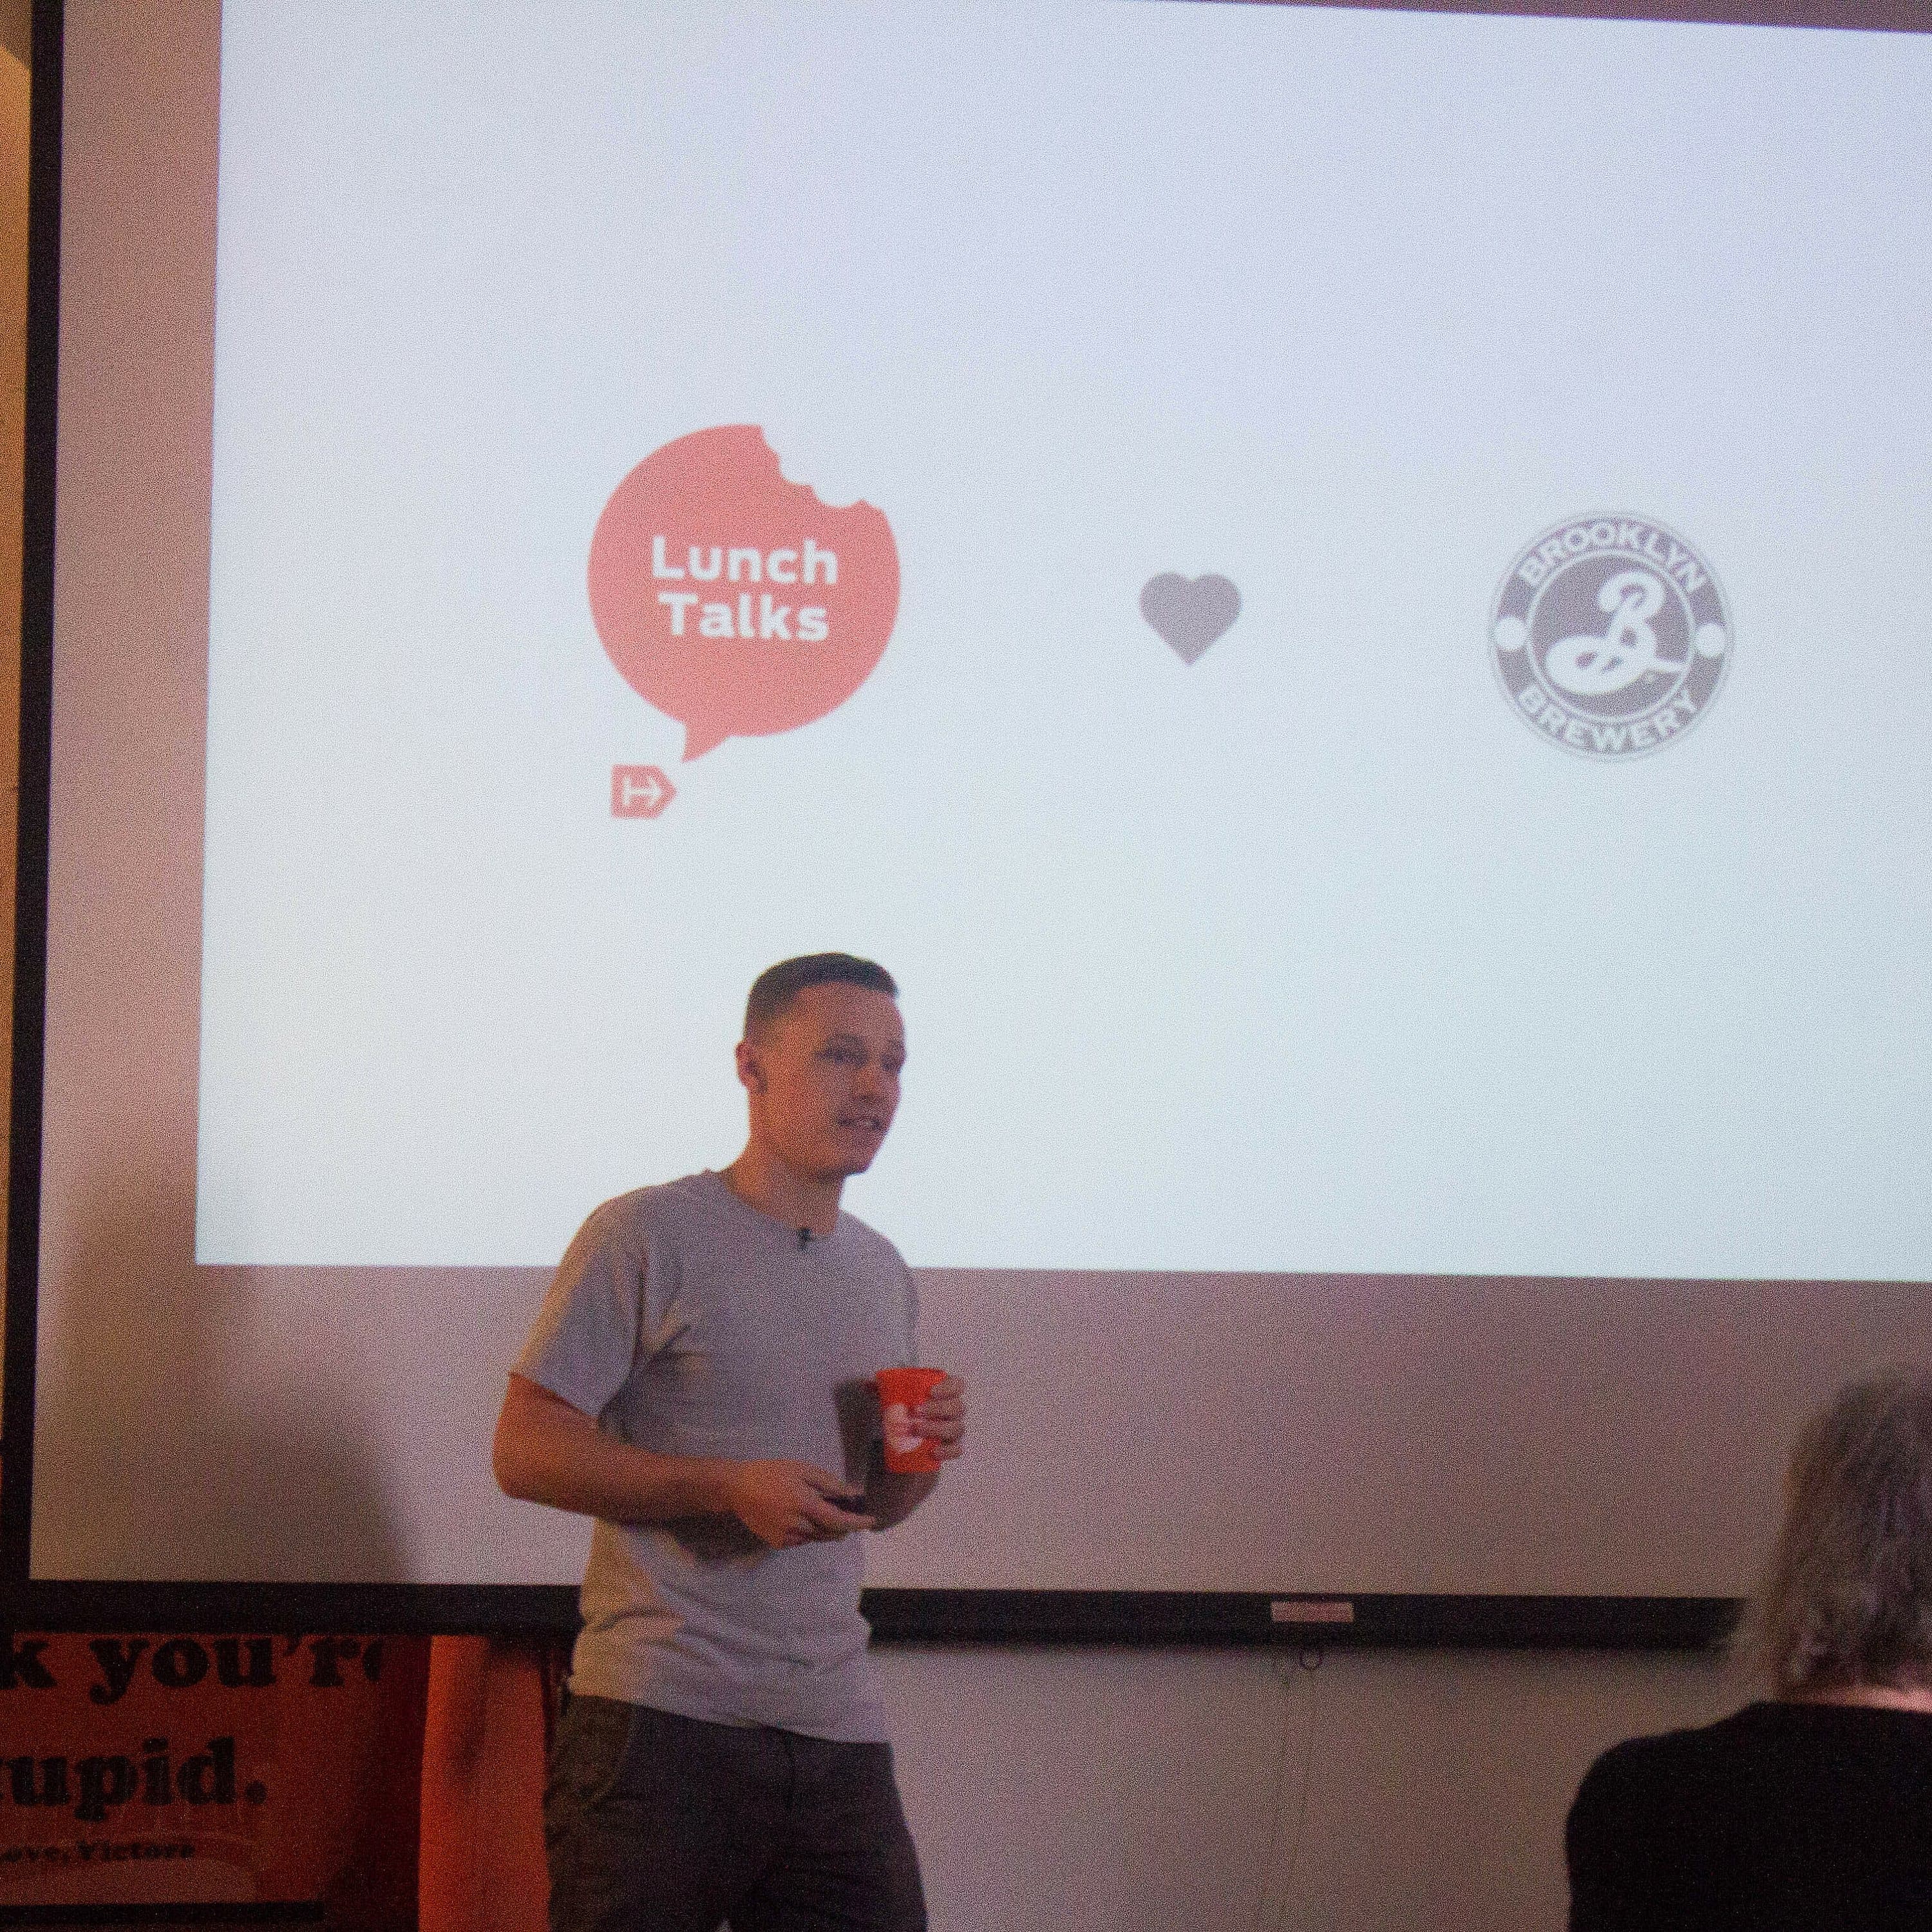 A man in a grey t-shirt stands in front of a projection screen holding a microphone and a red cup. The screen shows logos for "Lunch Talks," "Brooklyn Brewery," and "D Co. Design" with a heart symbol between them. People are seated facing him.